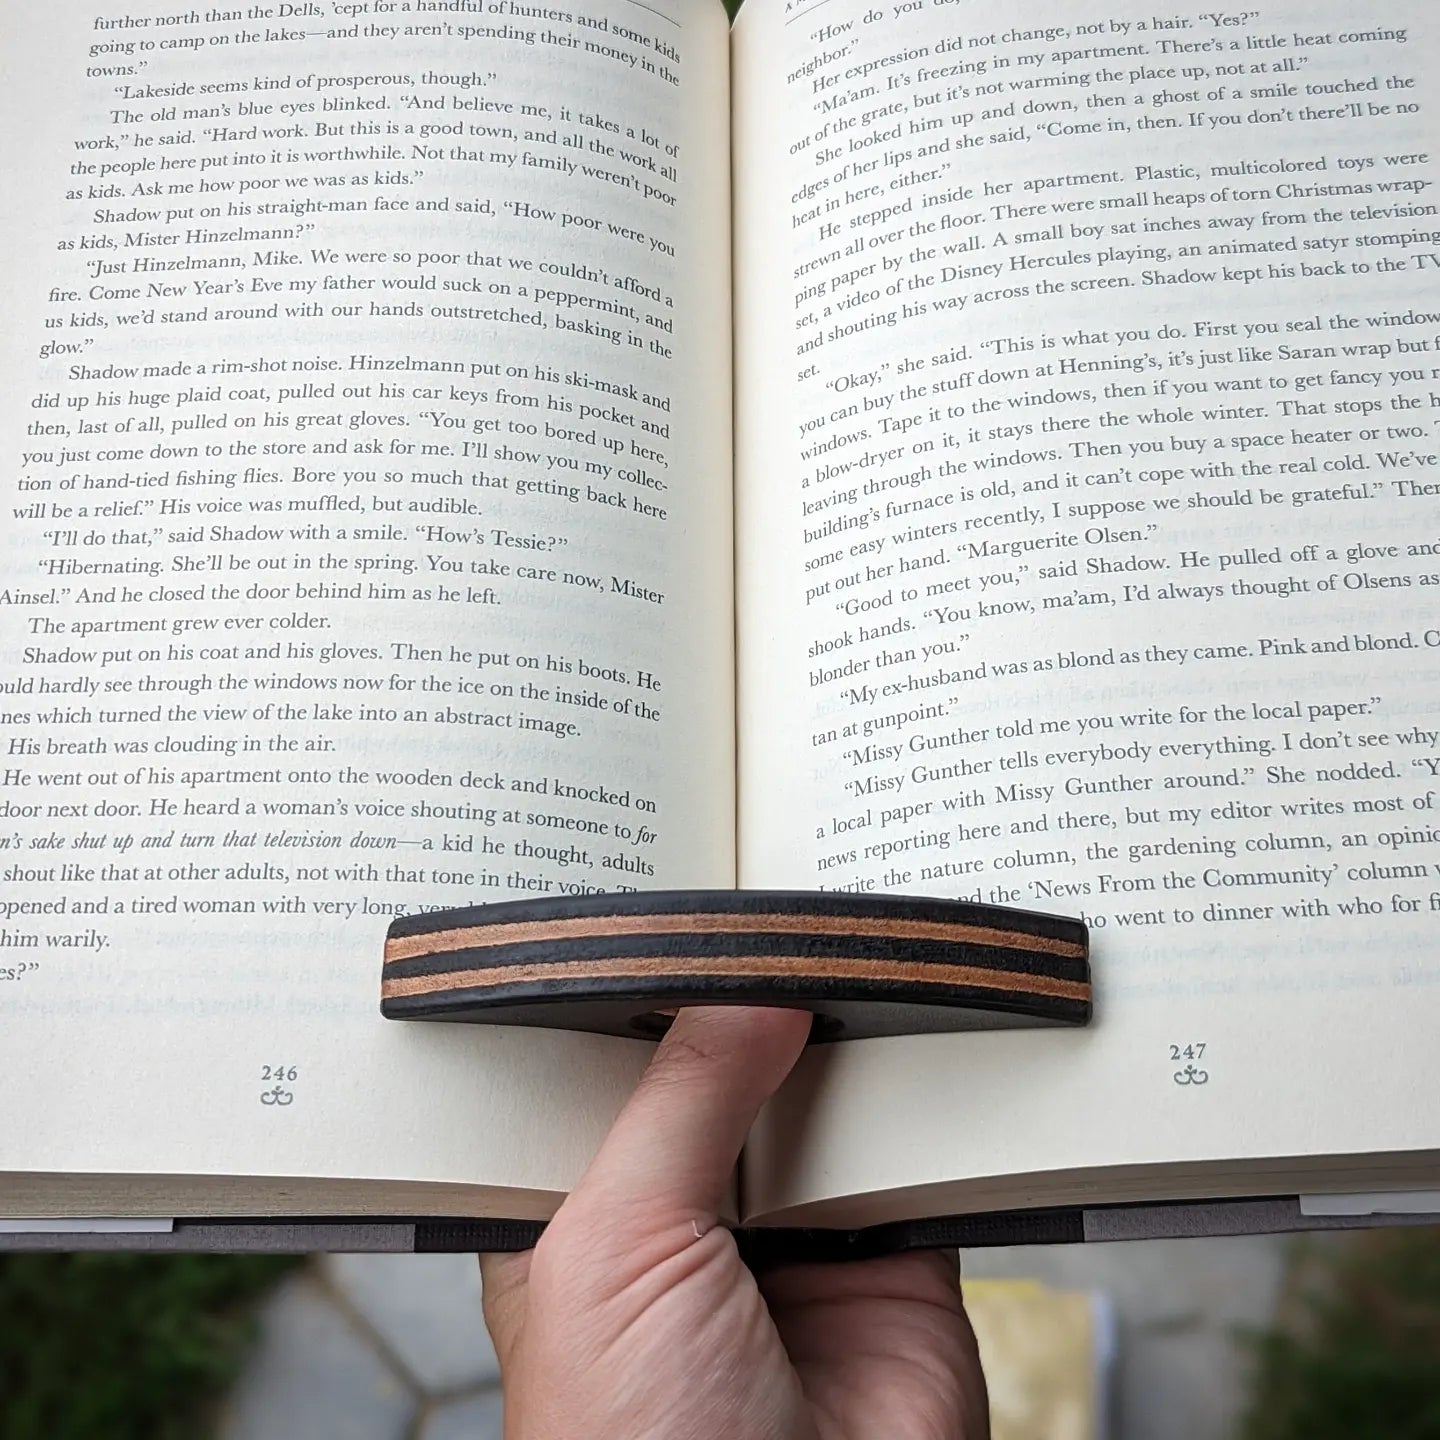 Stacked Leather Book Page Holder | Black + Tan